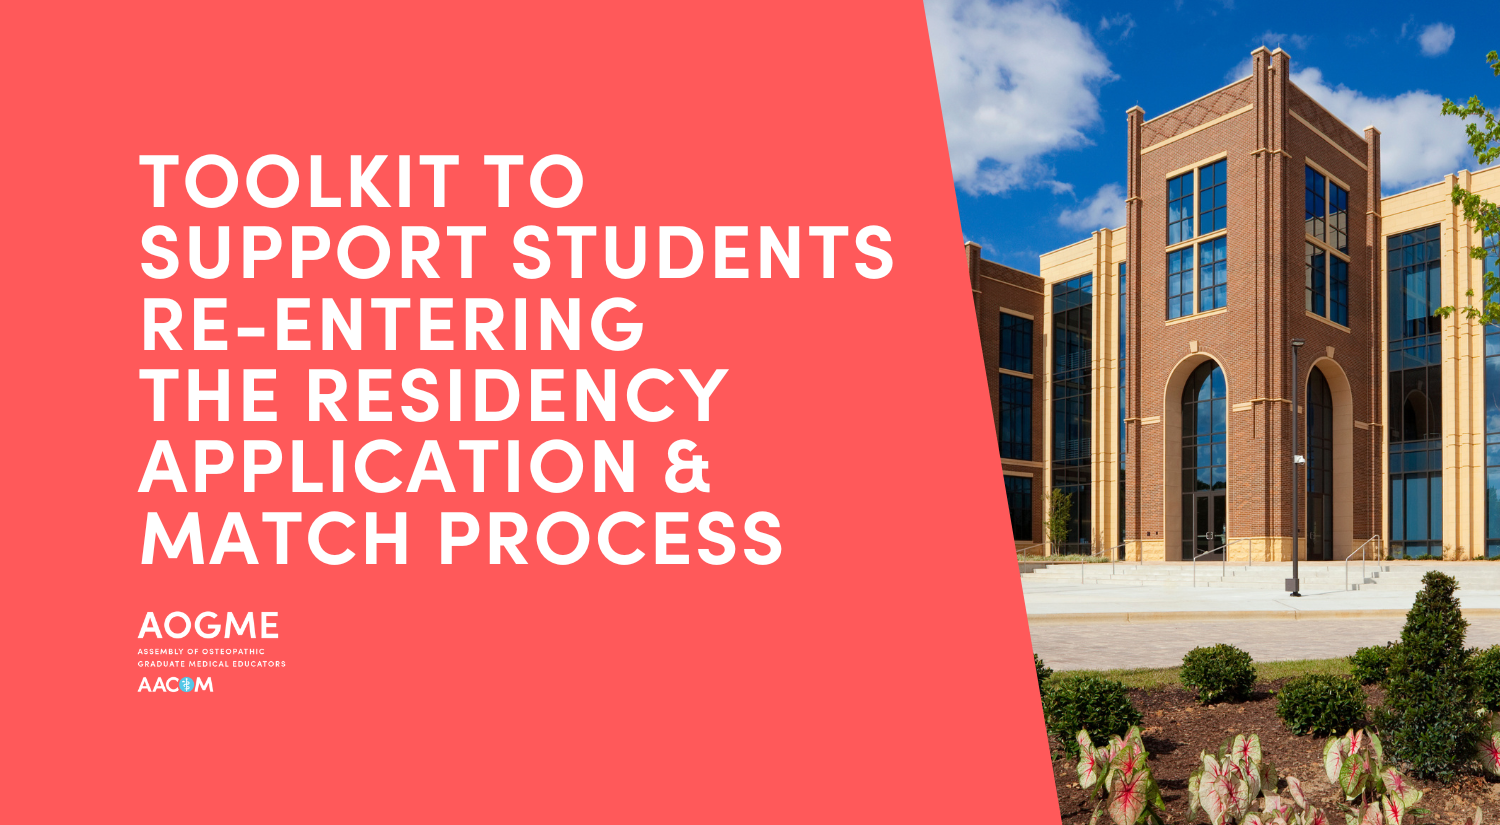 Toolkit to Support Students Re-entering Residency banner